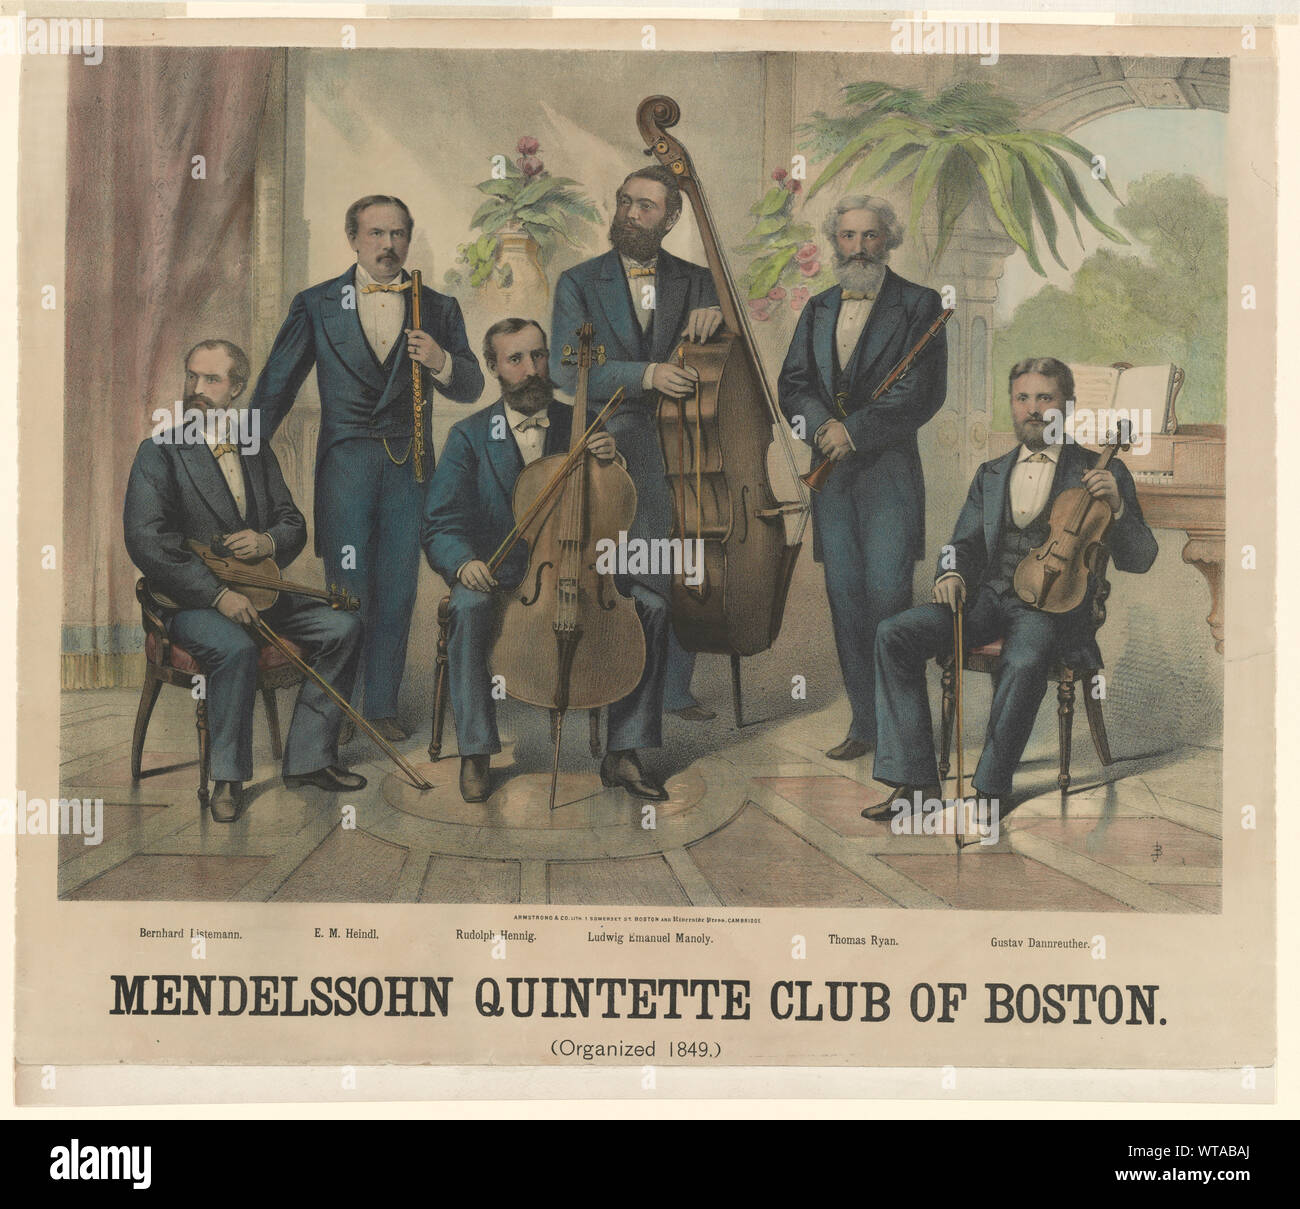 Mendelssohn Quintette Club of Boston (organized 1849)  Print shows a group portrait of six members of the Mendelssohn Quintette Club of Boston with their instruments; shown are, from left, Bernhard Listemann, E.M. Heindl, Rudolph Hennig, Ludwig Emanuel Manoly, Thomas Ryan, and Gustav Dannreuther. Stock Photo